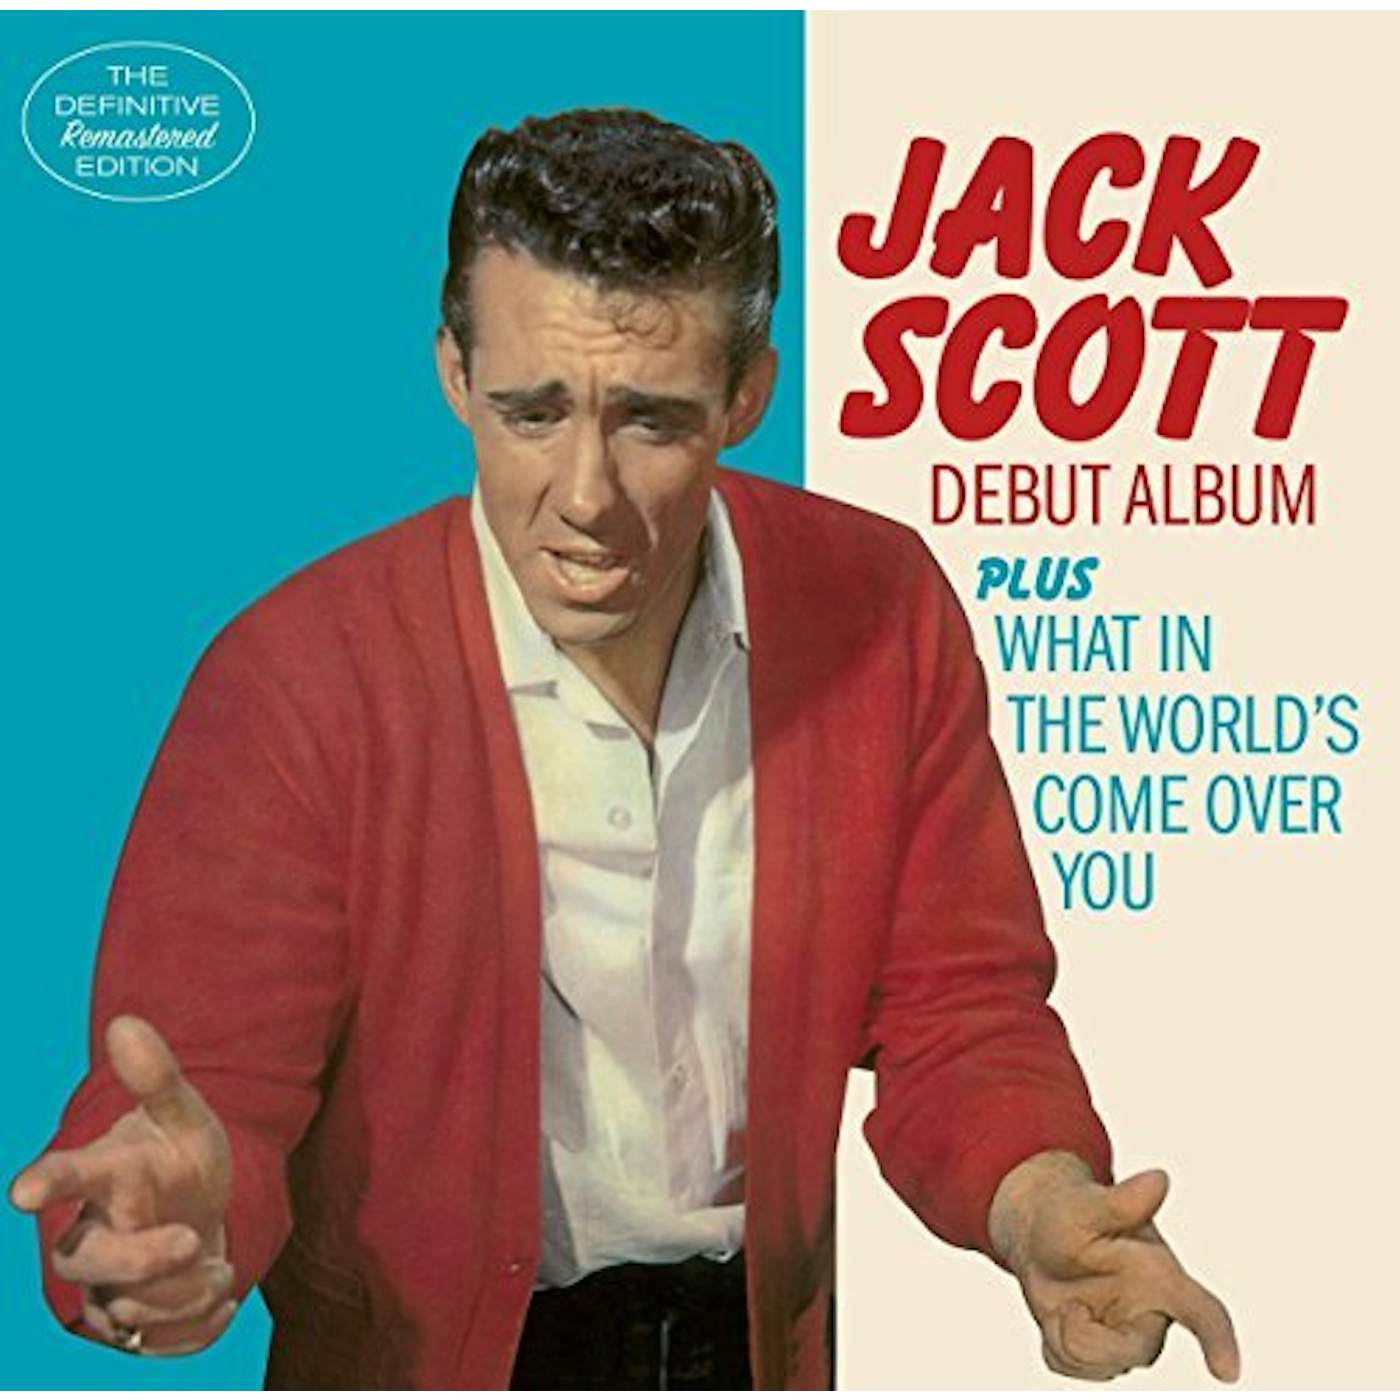 Jack Scott DEBUT ALBUM / WHAT IN THE WORLD'S COME OVER YOU CD